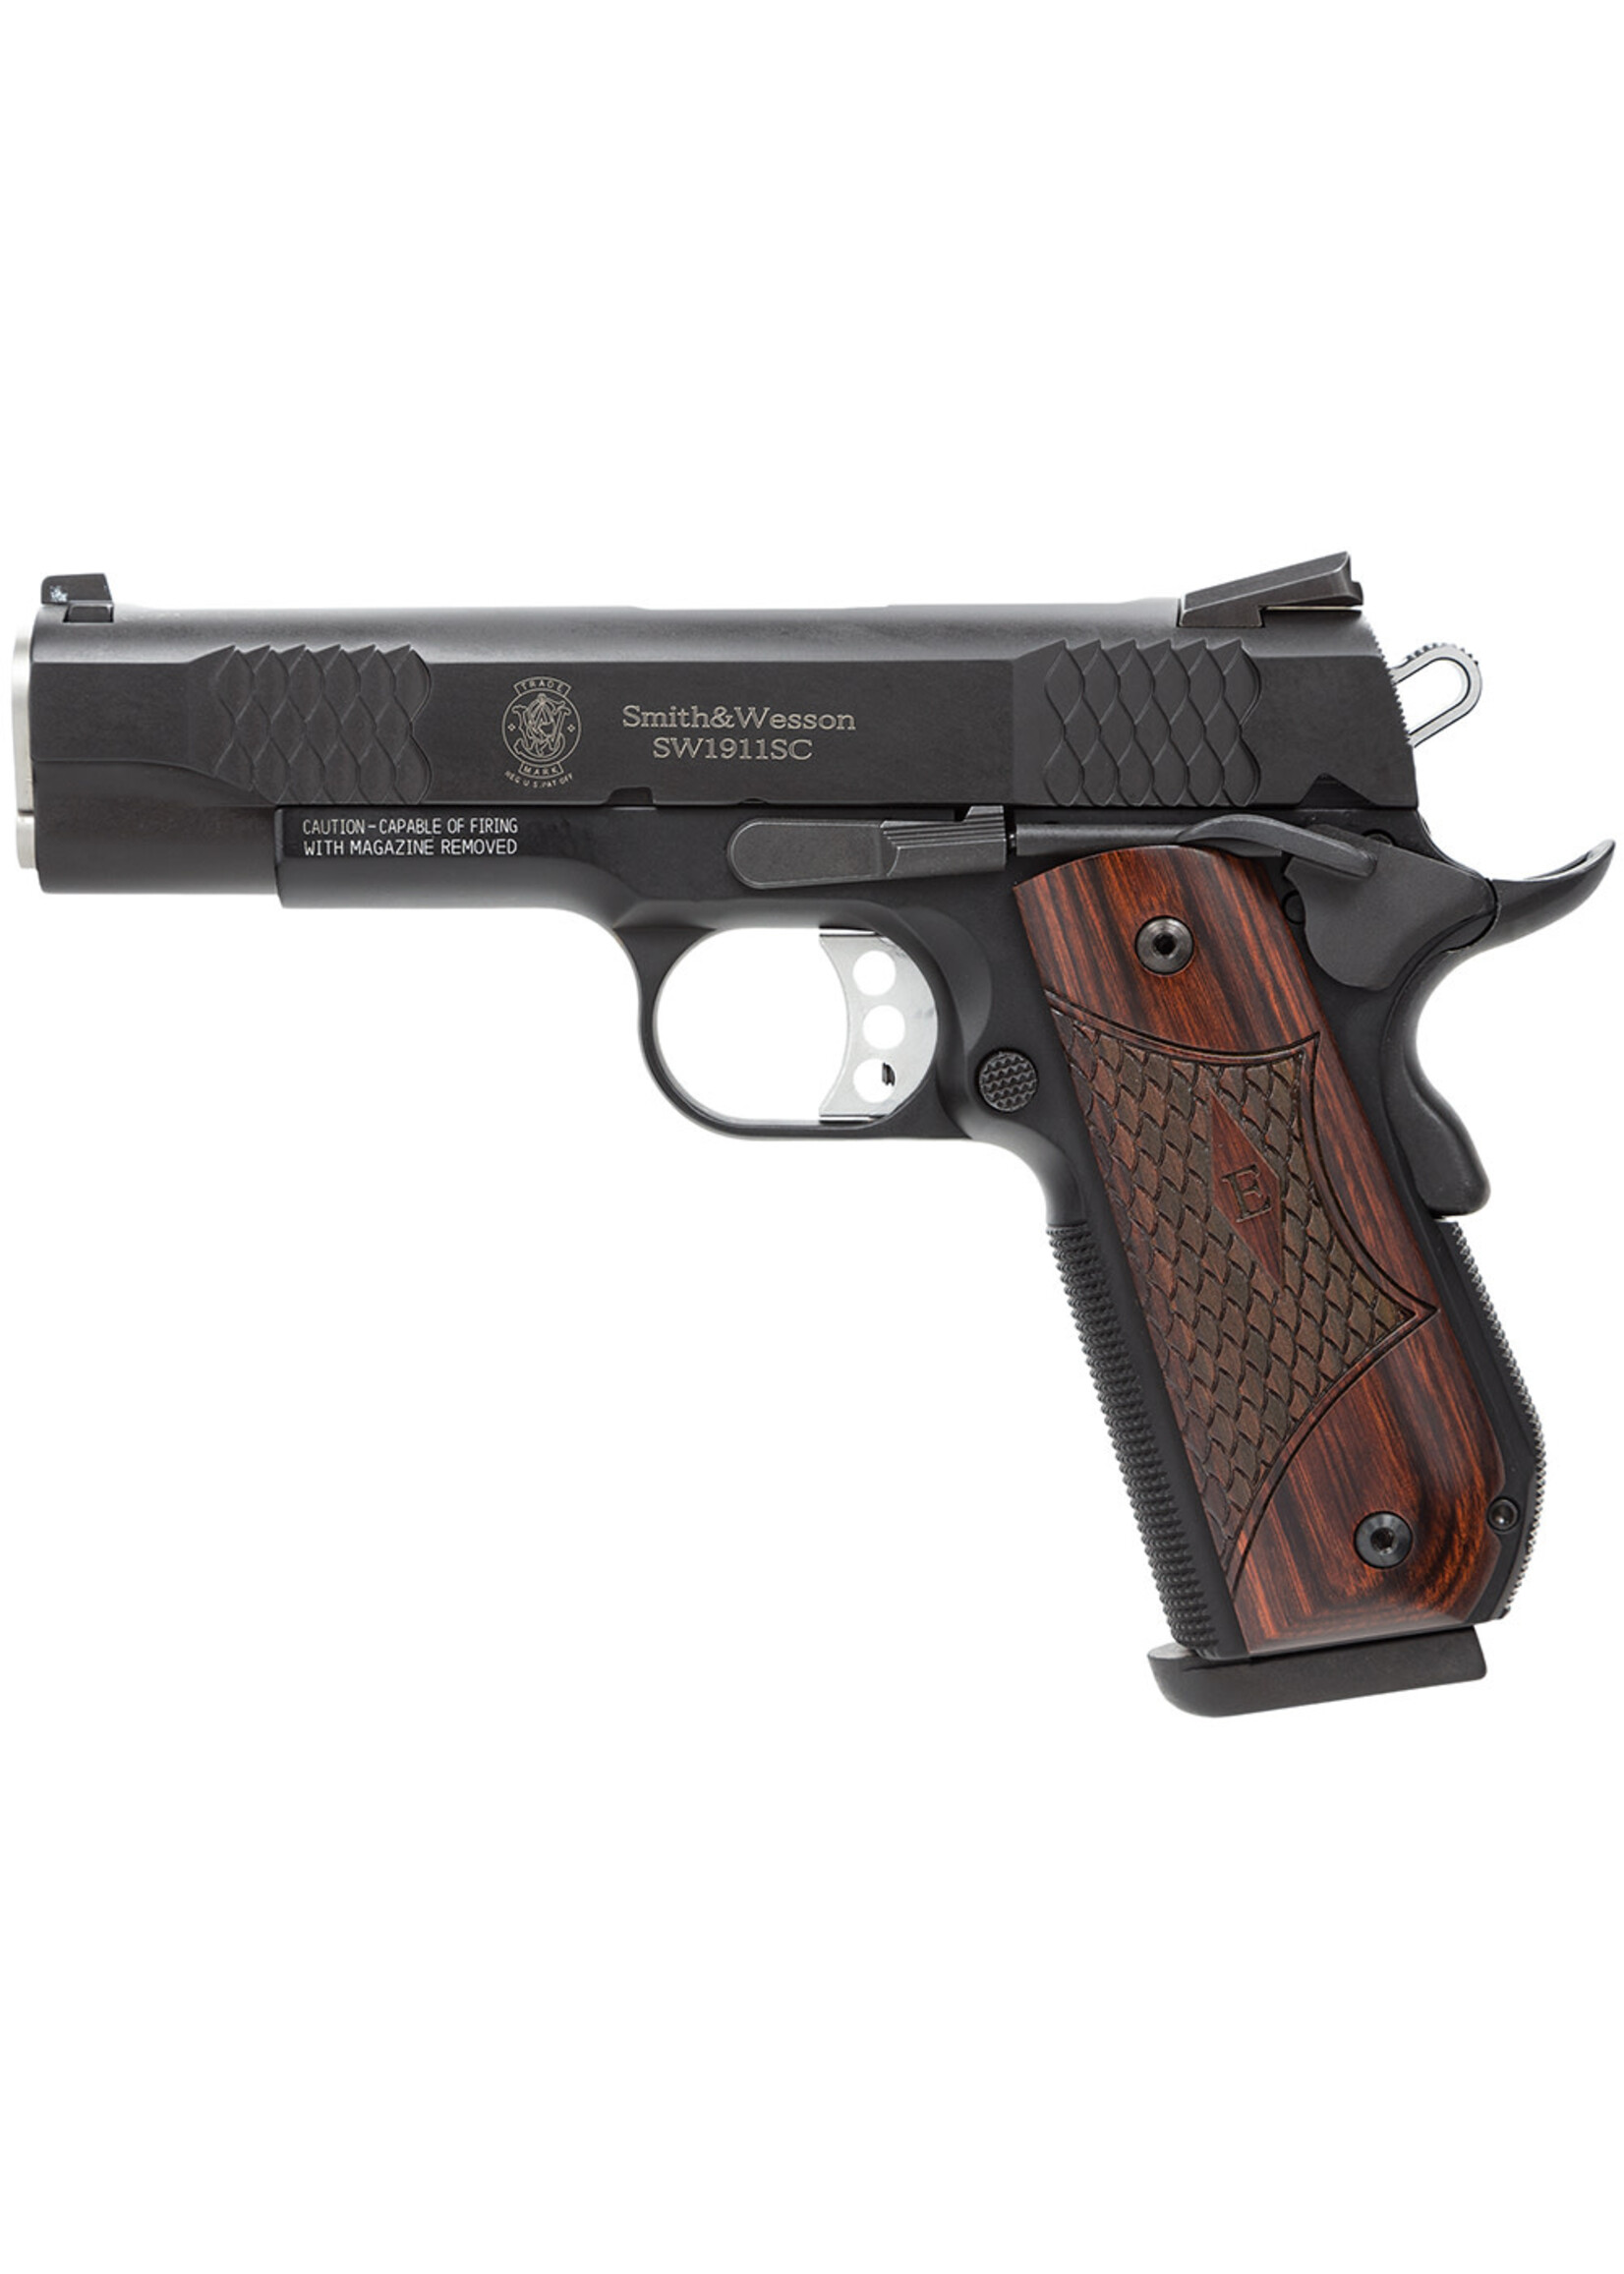 Smith and Wesson (S&W) Smith & Wesson 108483 1911 E-Series 45 ACP 7+1/8+1, 4.25" Stainless Steel Barrel, Black Serrated Stainless Steel Slide, Black Aluminum Frame w/Beavertail, Round Butt Laminate Wood Grip